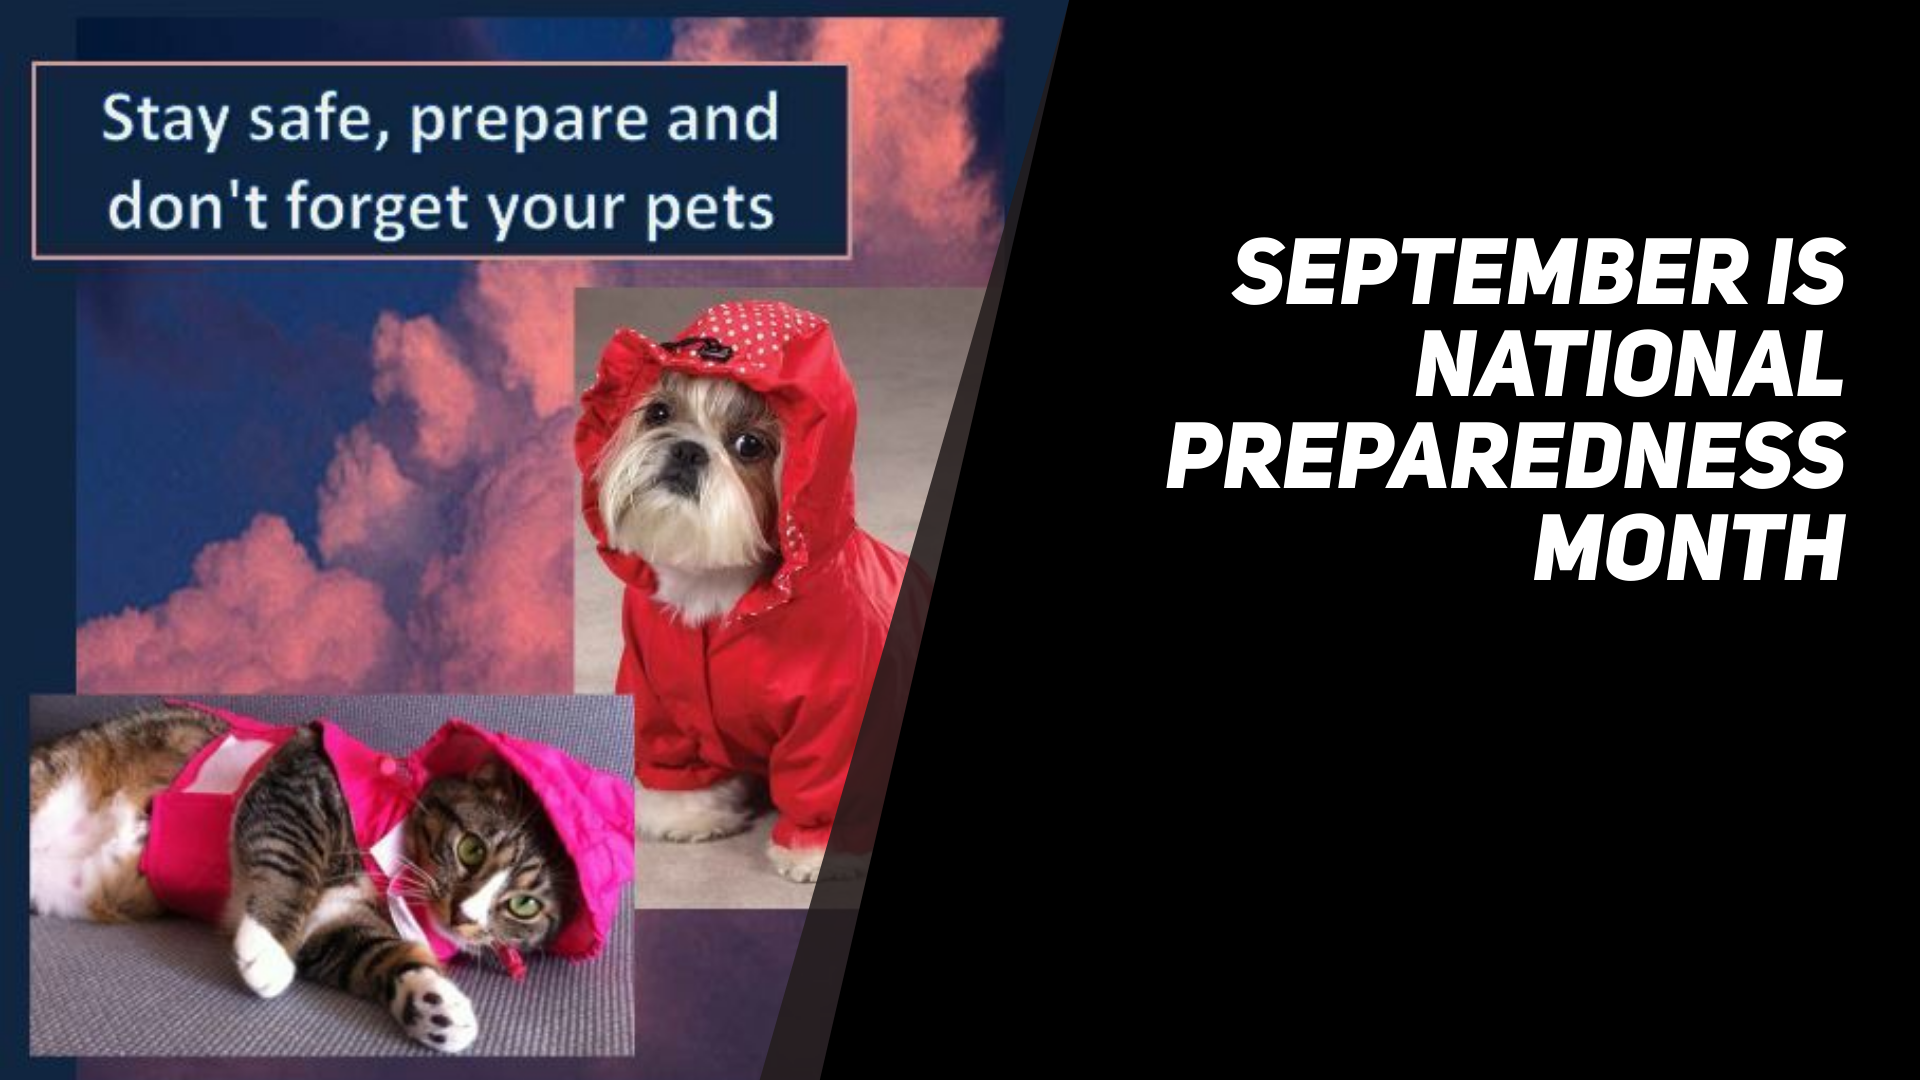 Prepare_For_Your_Pets_During_National_Preparedness_Month.png